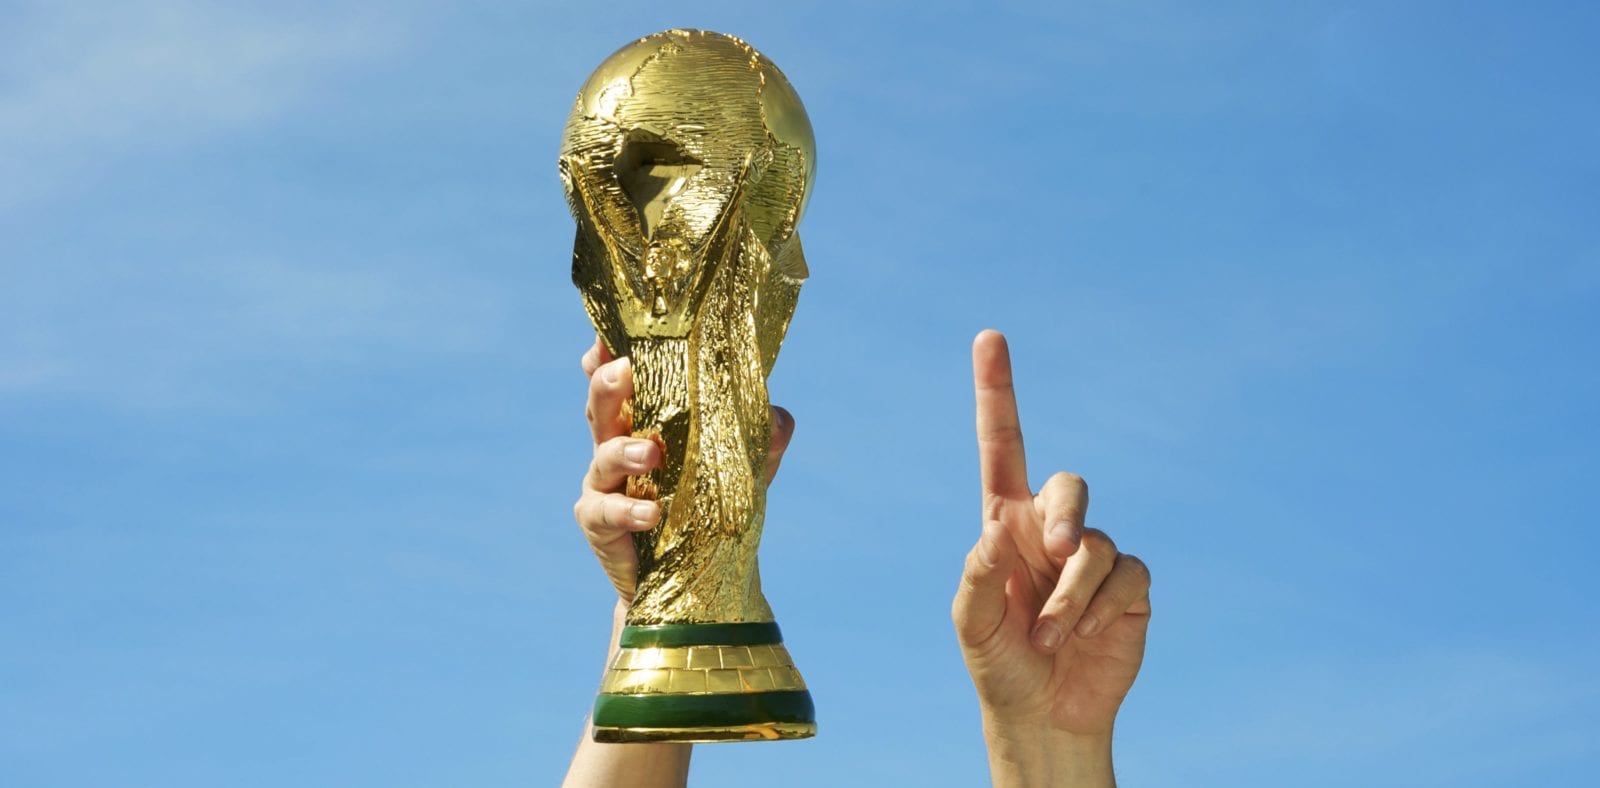 FIFA World Cup Trophy Is Crafted in 18K Gold With Green Malachite